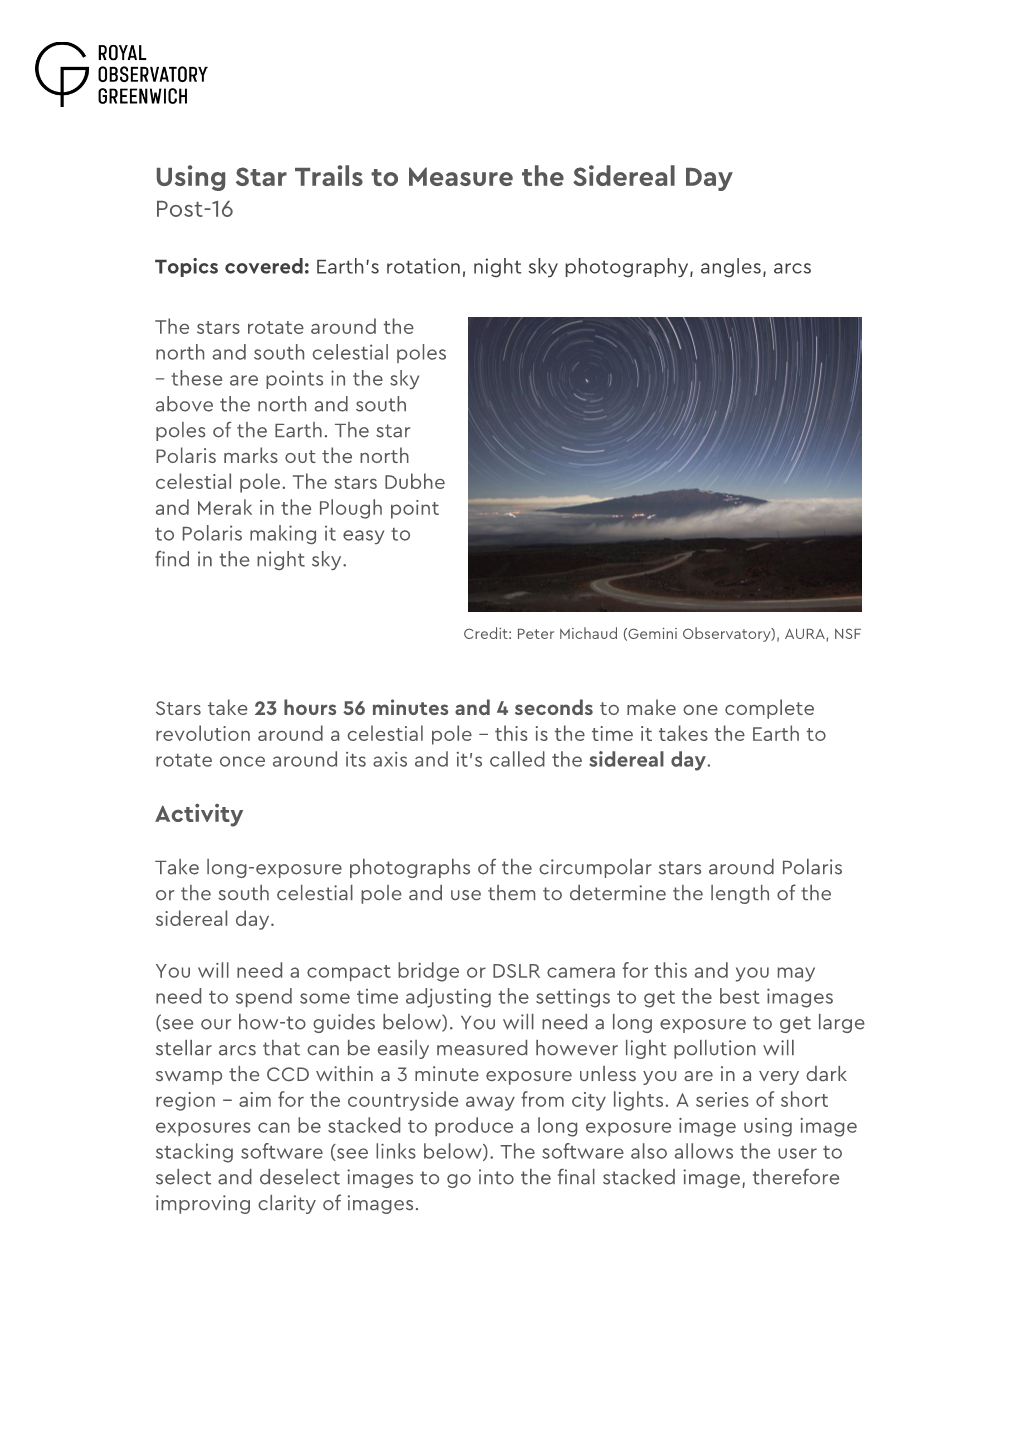 Using Star Trails to Measure the Sidereal Day Post-16